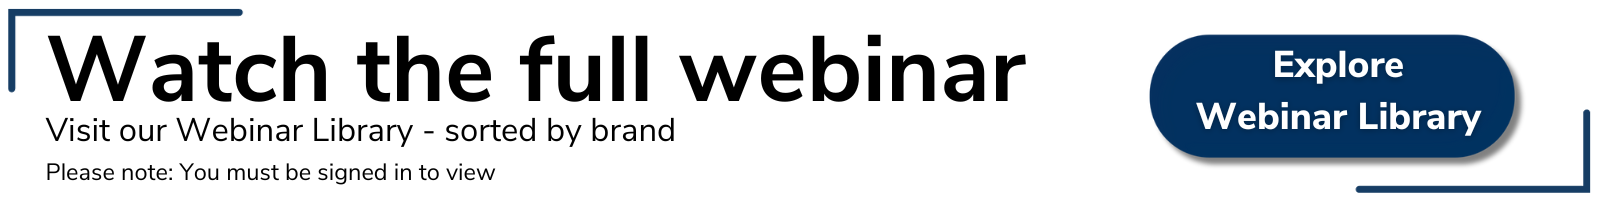 Visit our webinar library to watch the whole webinar